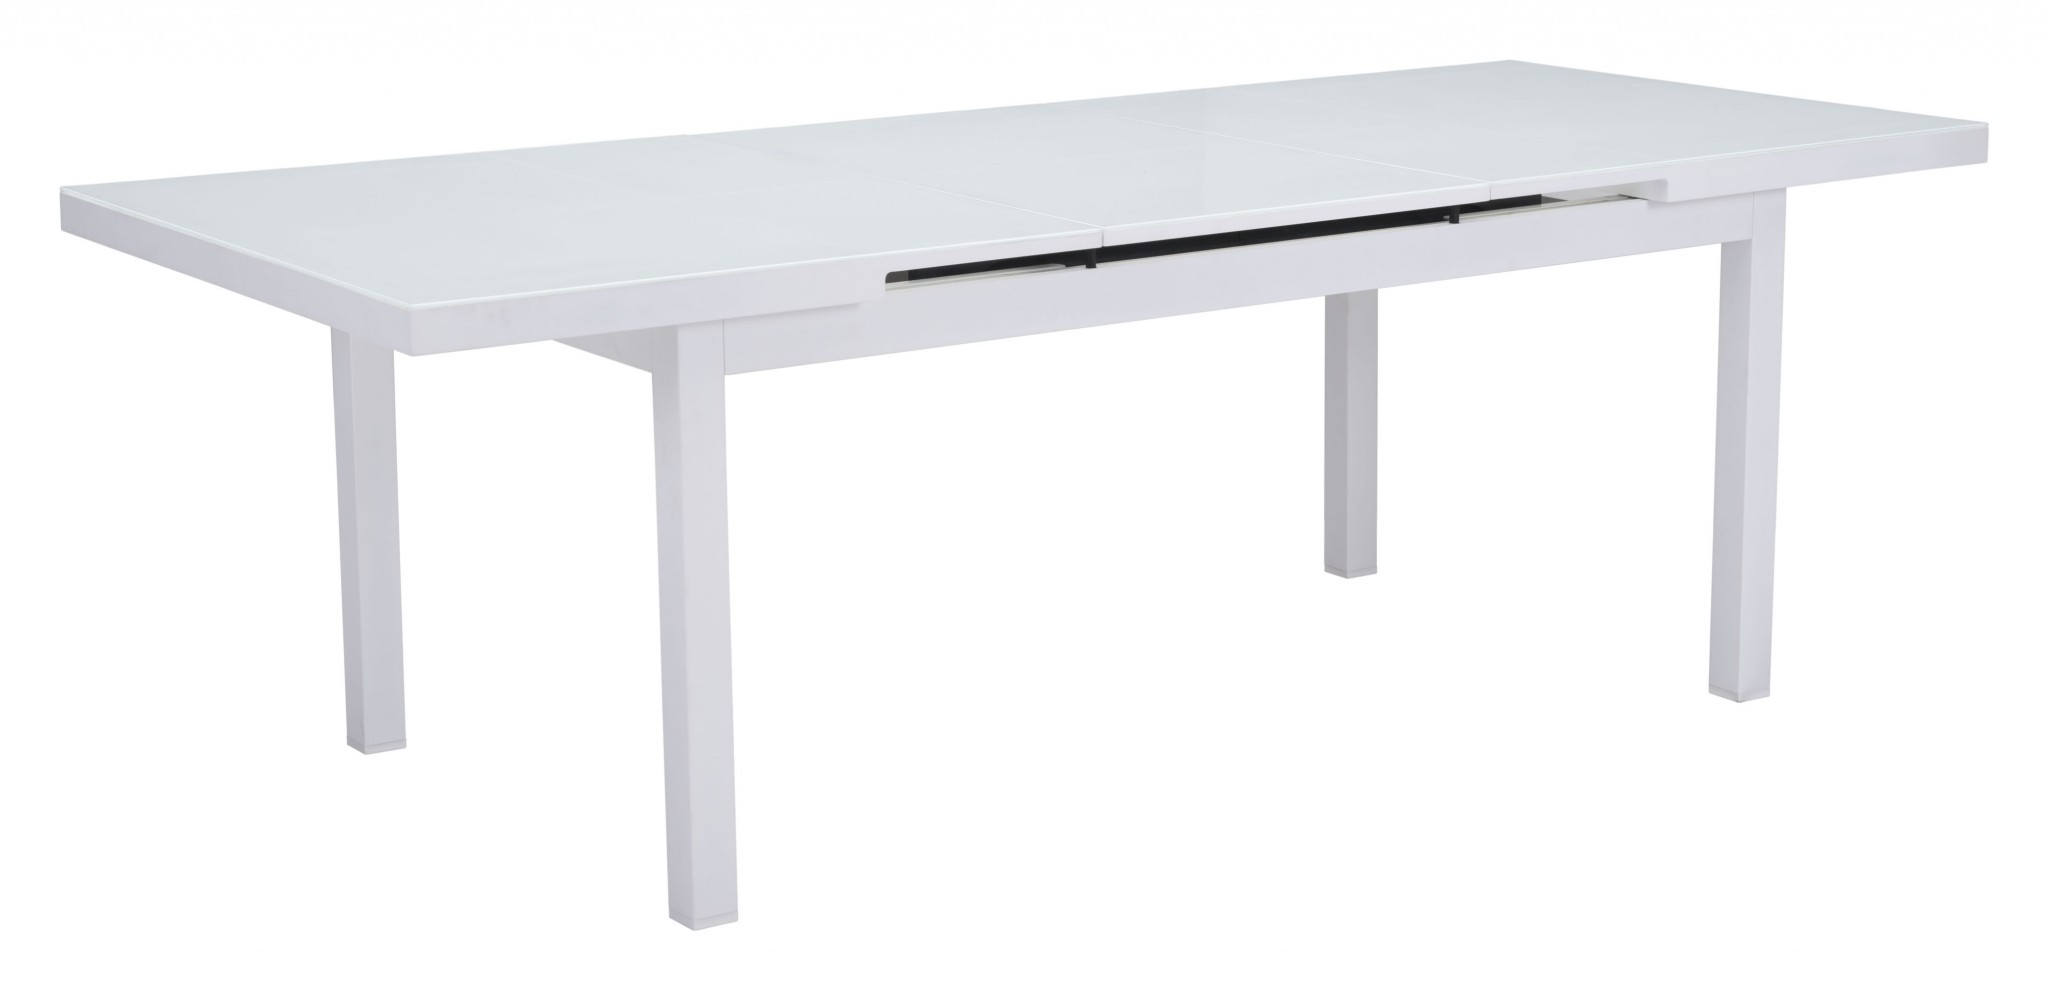 70.5" x 39.5" x 29.5" White, Tempered Glass, Aluminum, Dining Table